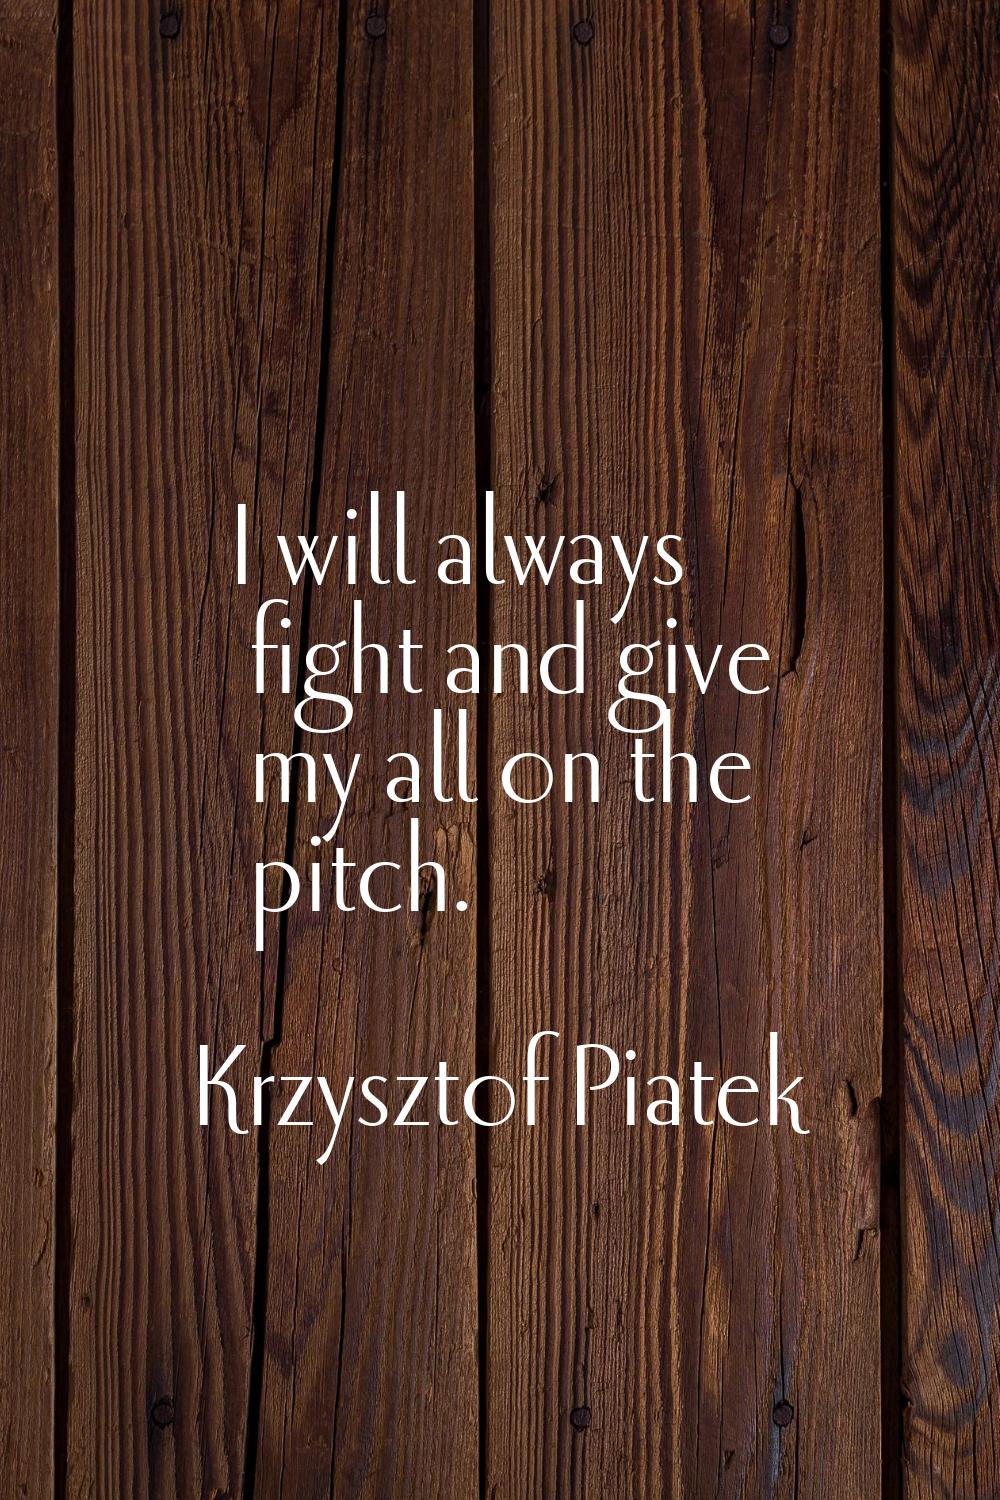 I will always fight and give my all on the pitch.